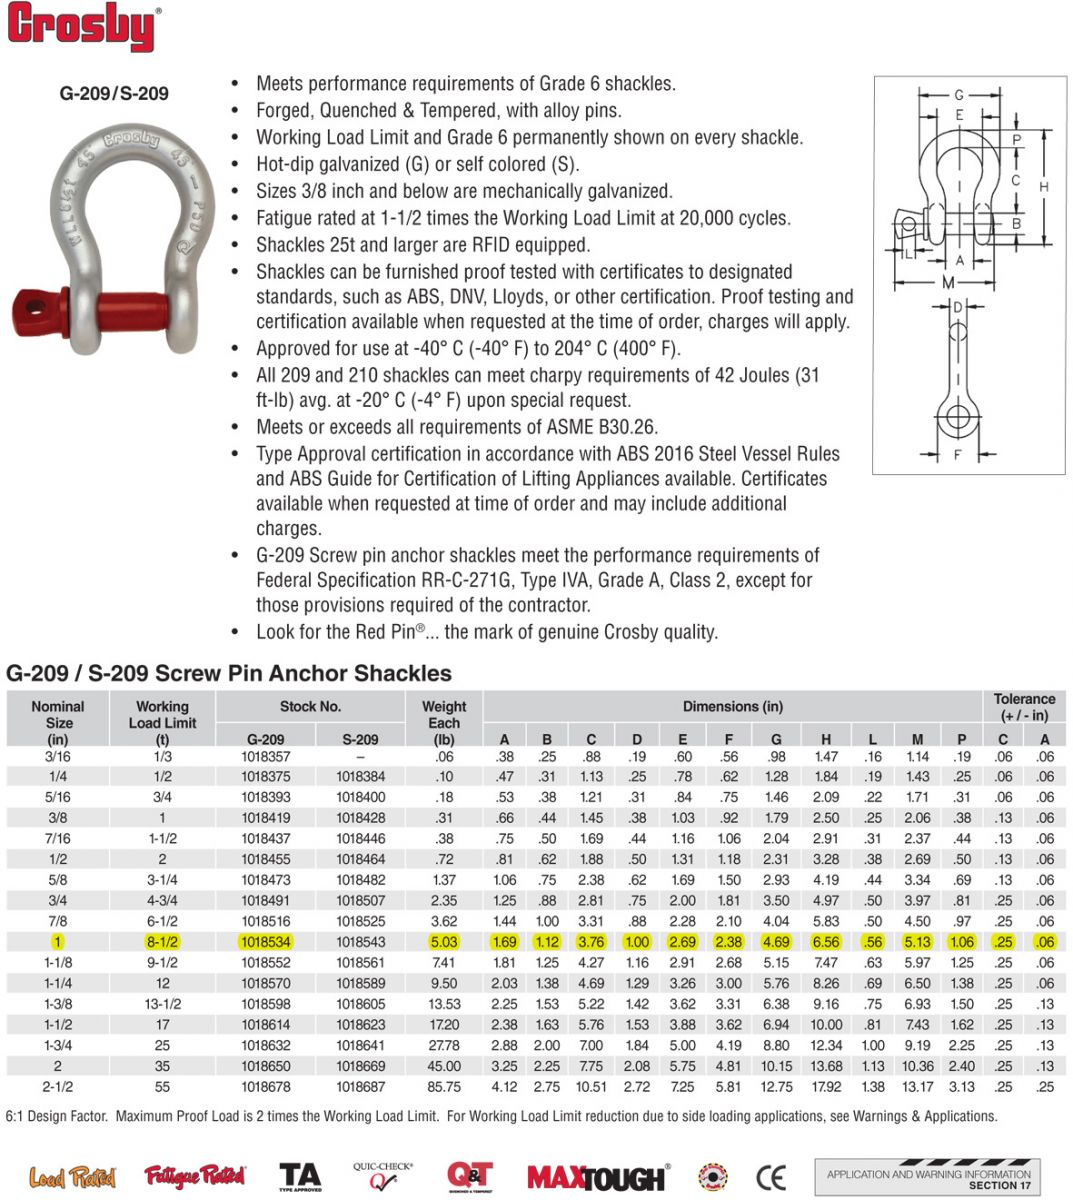 17 Ton Working Load Limit Crosby 1018614 Carbon Steel G-209 Screw Pin Anchor Shackle 1-1/2 Size Galvanized 